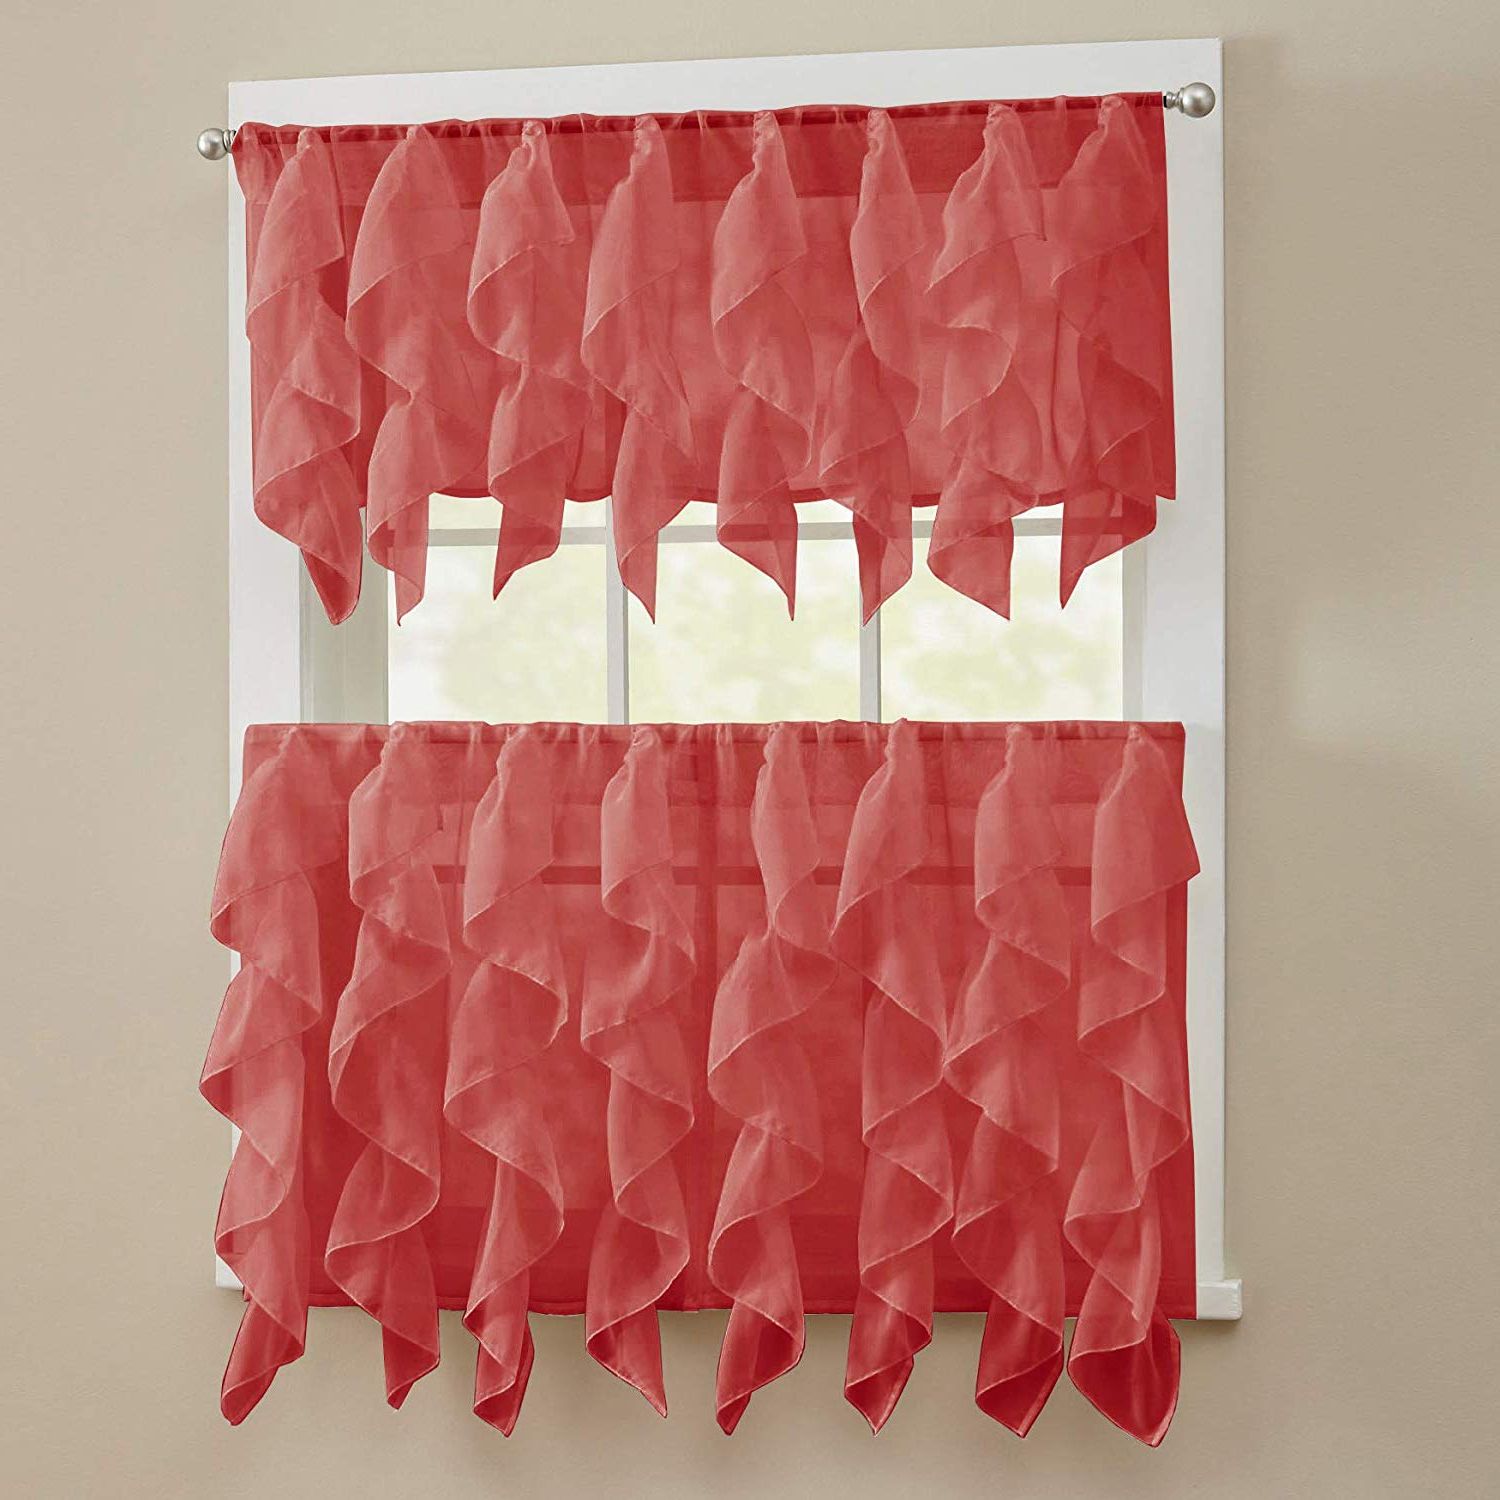 Vertical Ruffled Waterfall Valances And Curtain Tiers Pertaining To Recent Sweet Home Collection 3 Piece Kitchen Curtain Set Sheet Vertical Cascading  Waterfall Ruffle Includes Valance & Choice Of 24" Or 36" Teir Pair, Tier, (View 12 of 20)